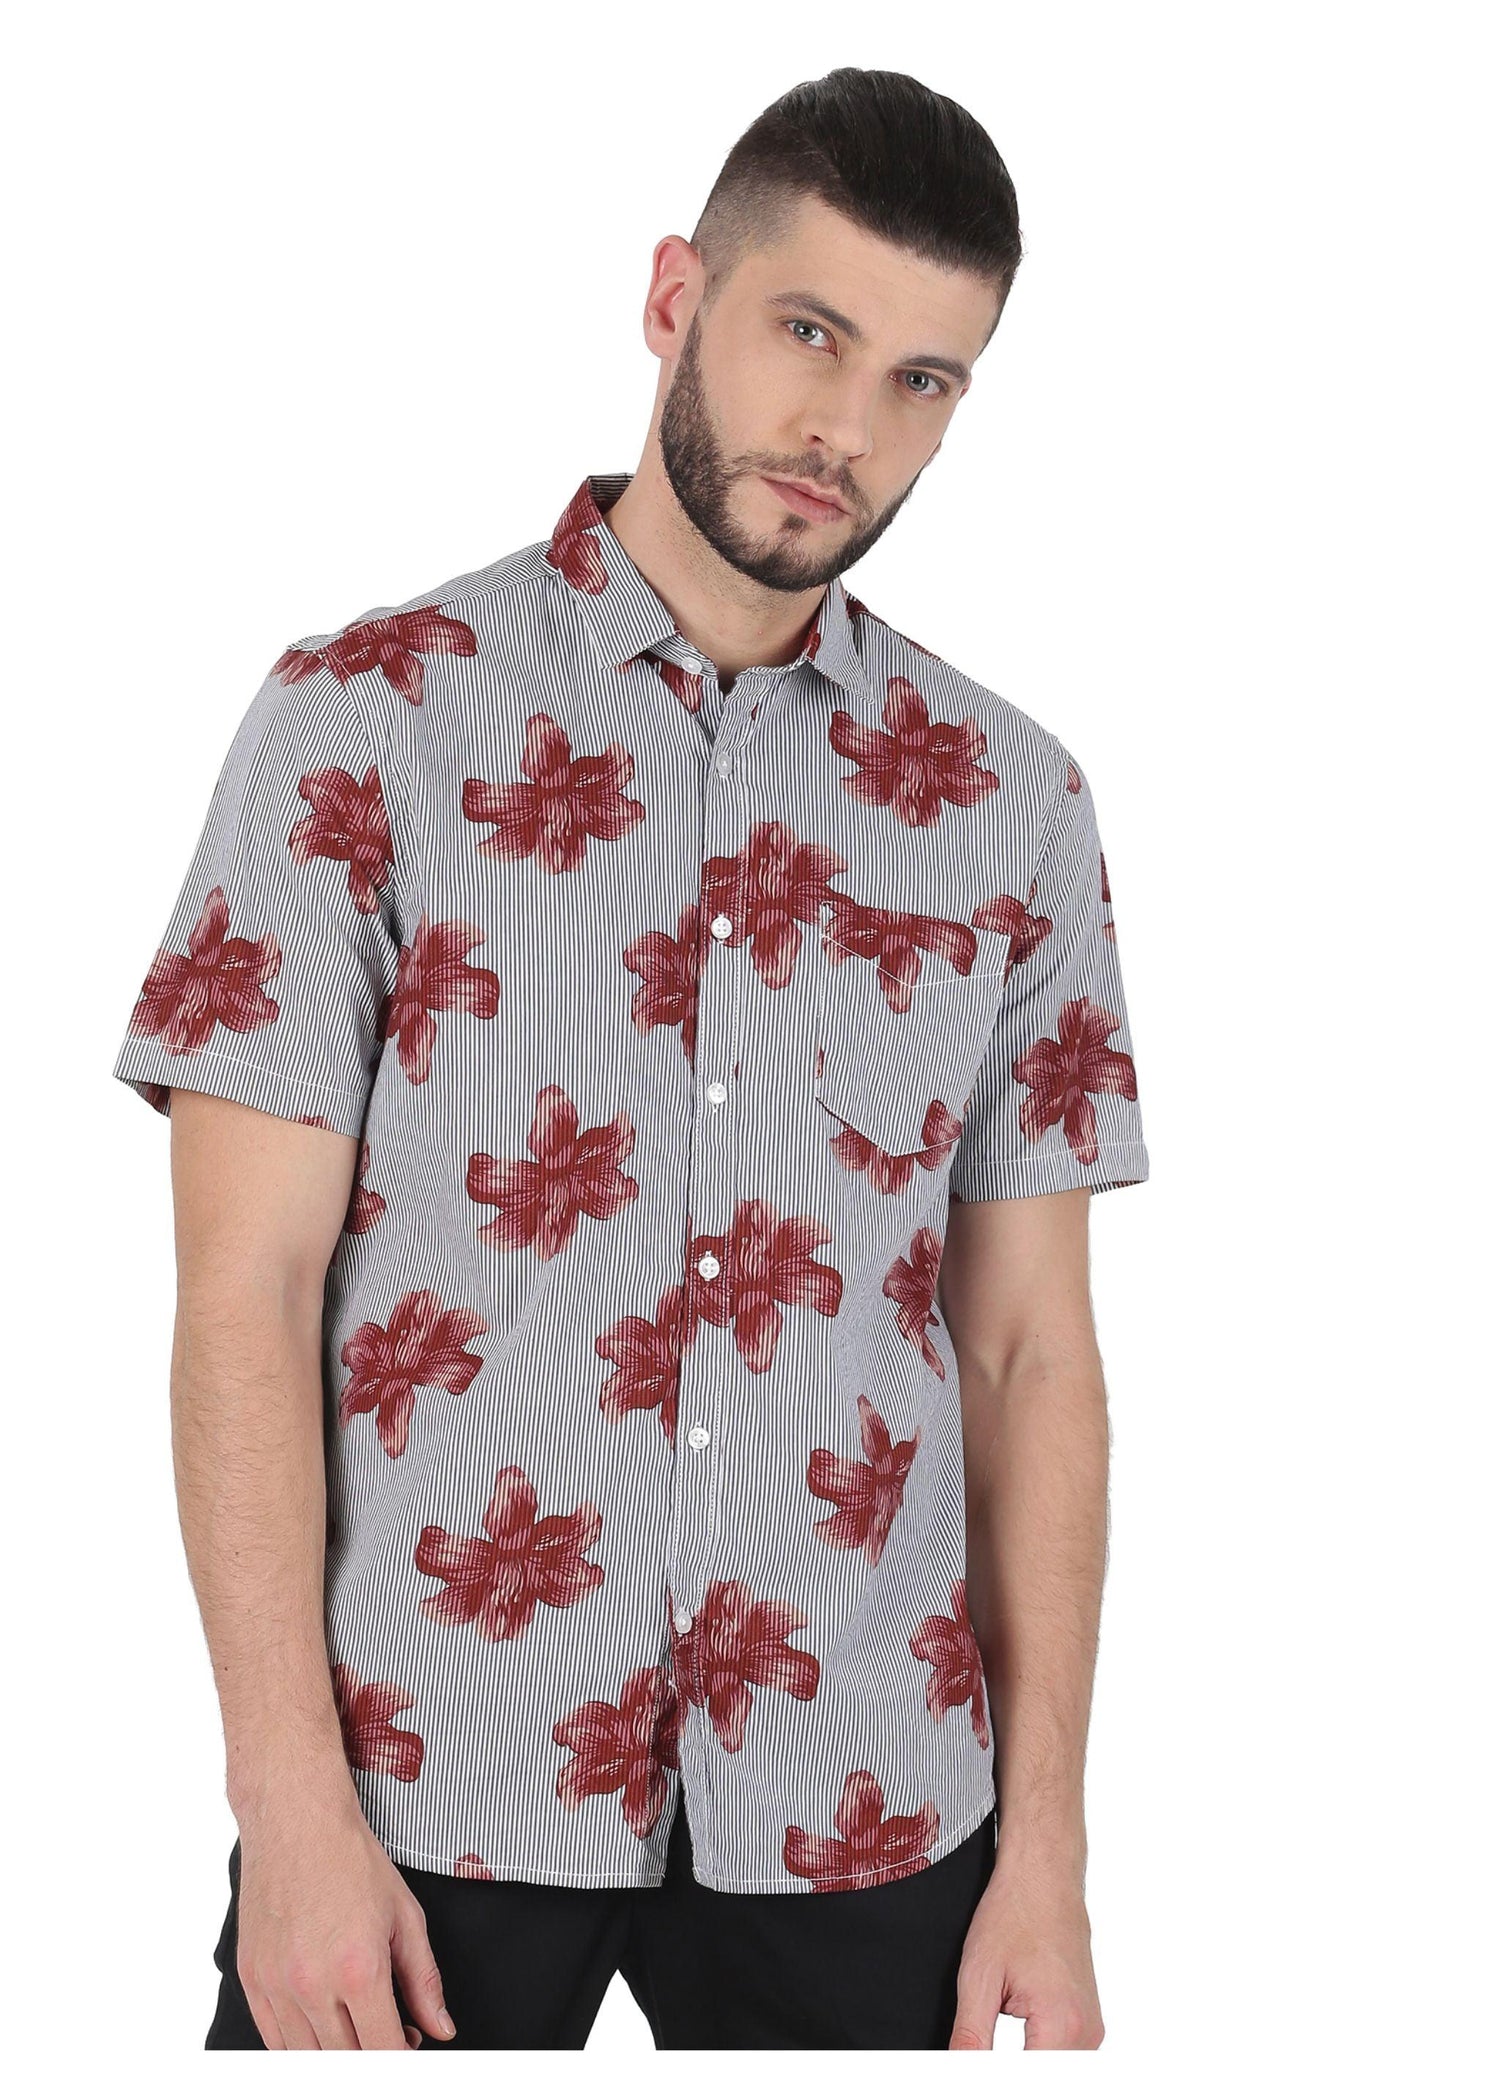 Tusok-brown-bloomFeatured Shirt, Vacation-Printed Shirtimage-Brown Bloom (6)